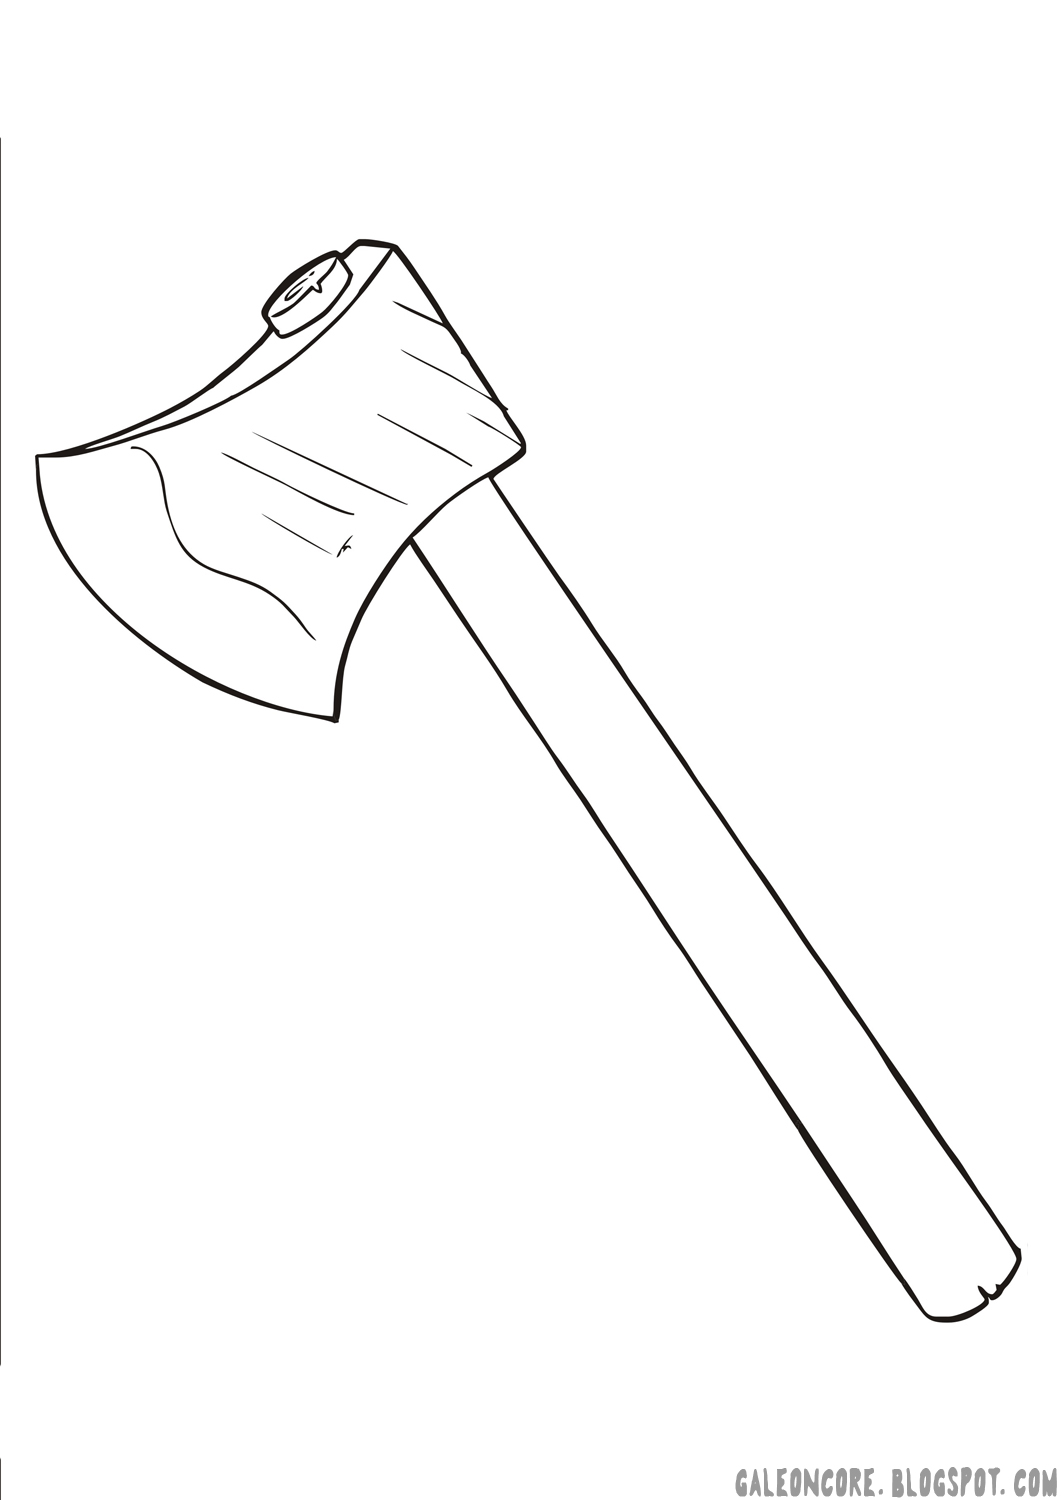 Elisha Floating Axe Head Coloring Page Sketch Coloring Page